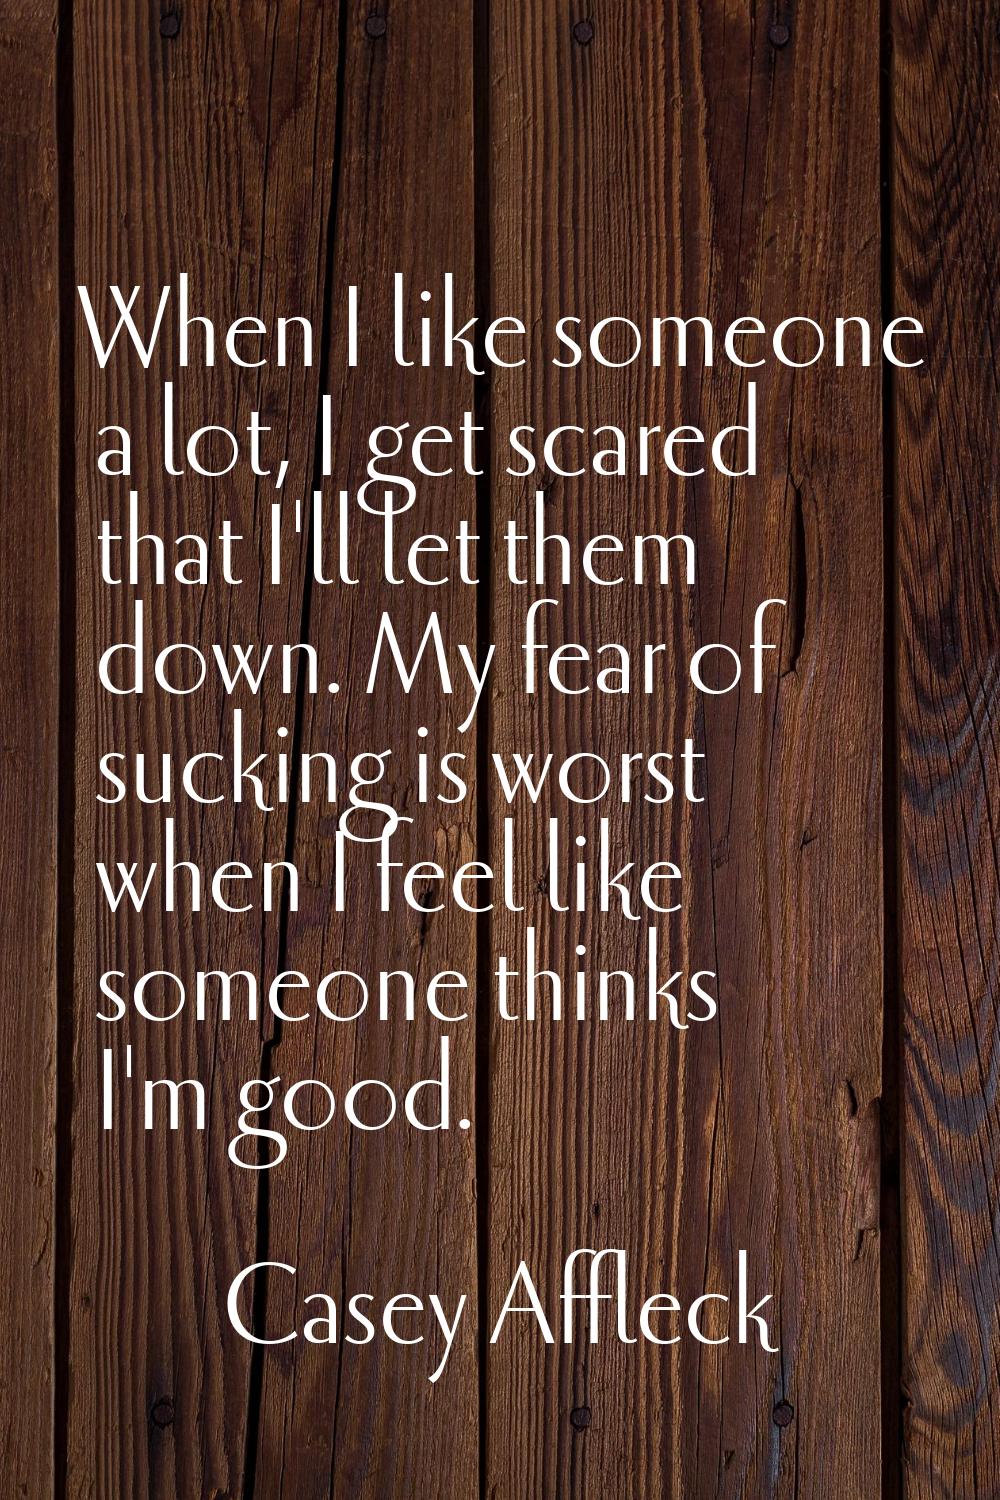 When I like someone a lot, I get scared that I'll let them down. My fear of sucking is worst when I